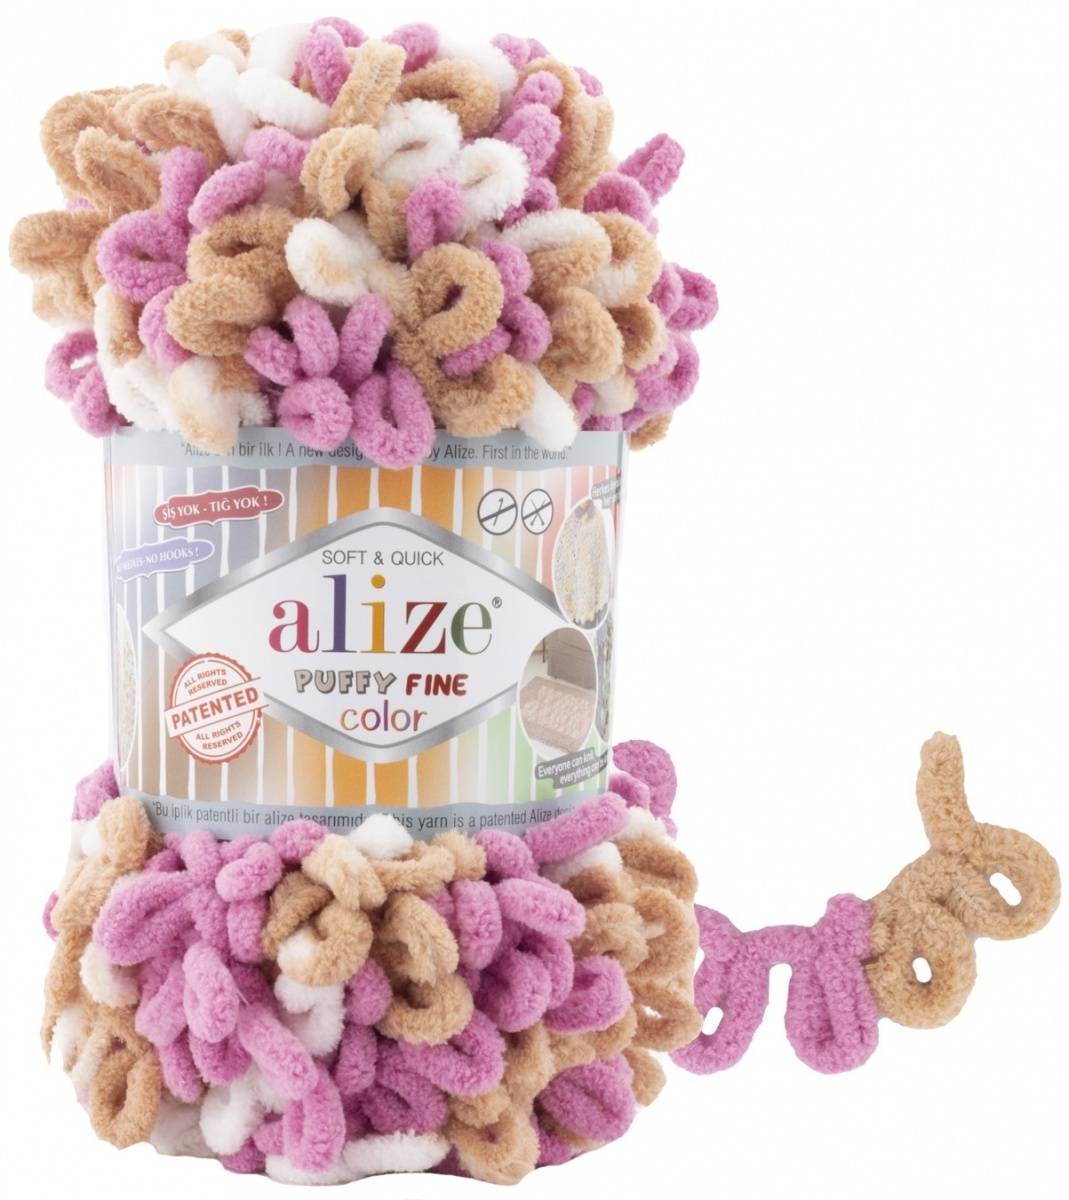 Alize Puffy Fine Color, 100% Micropolyester 5 Skein Value Pack, 500g фото 26